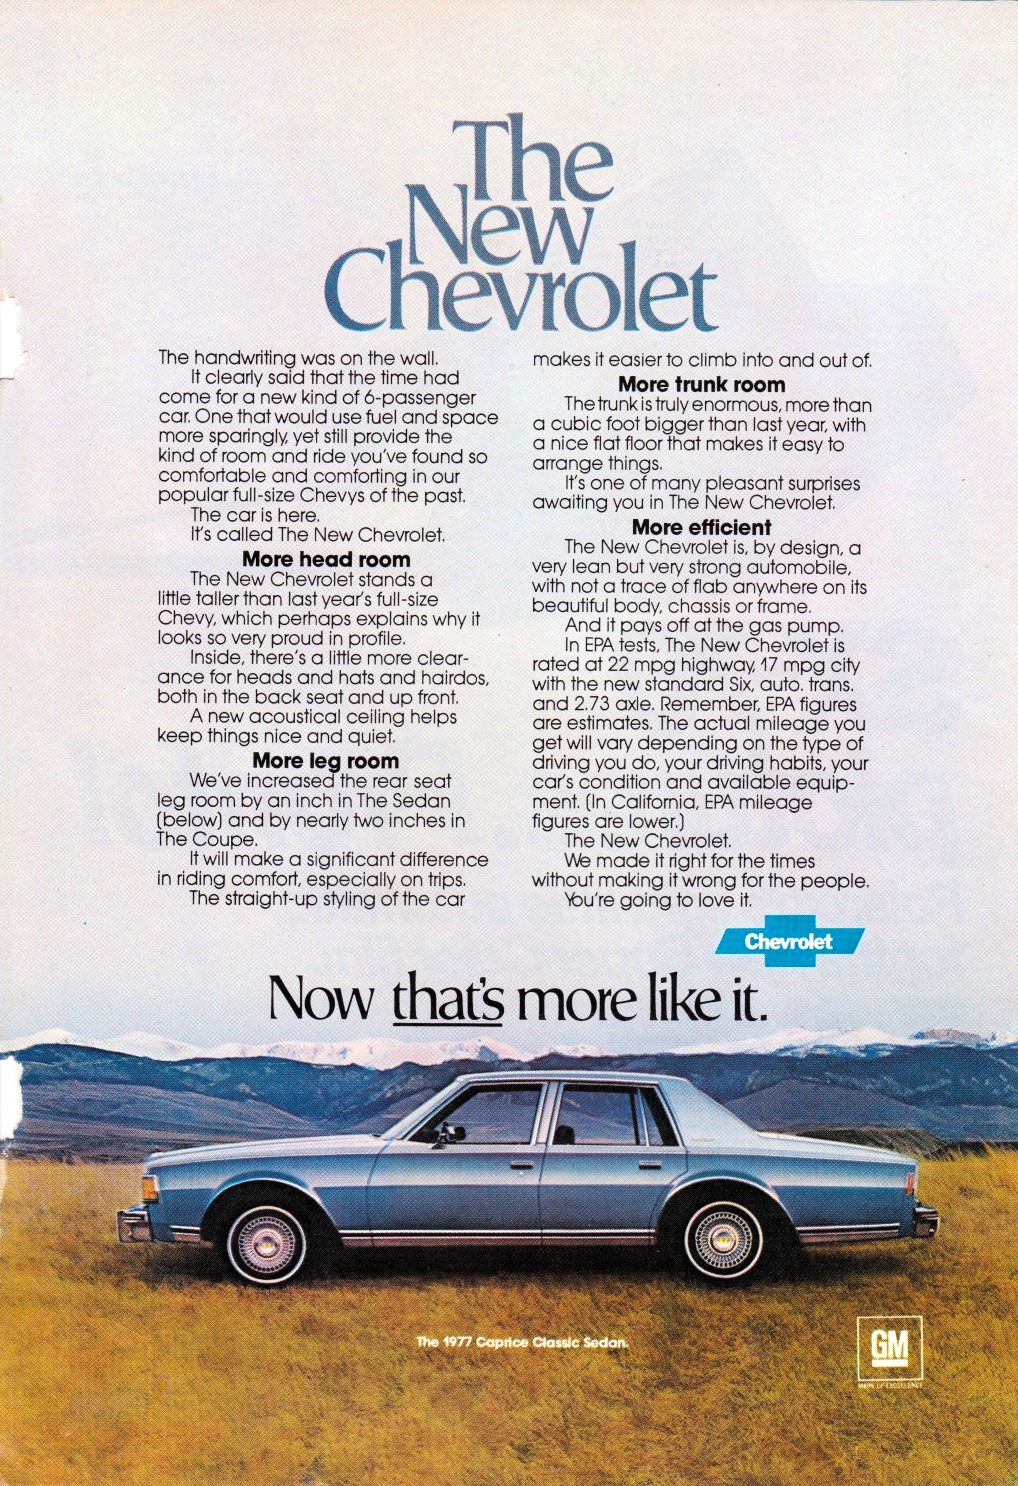 the ad for a new chevrolet was featured on the front of the magazine